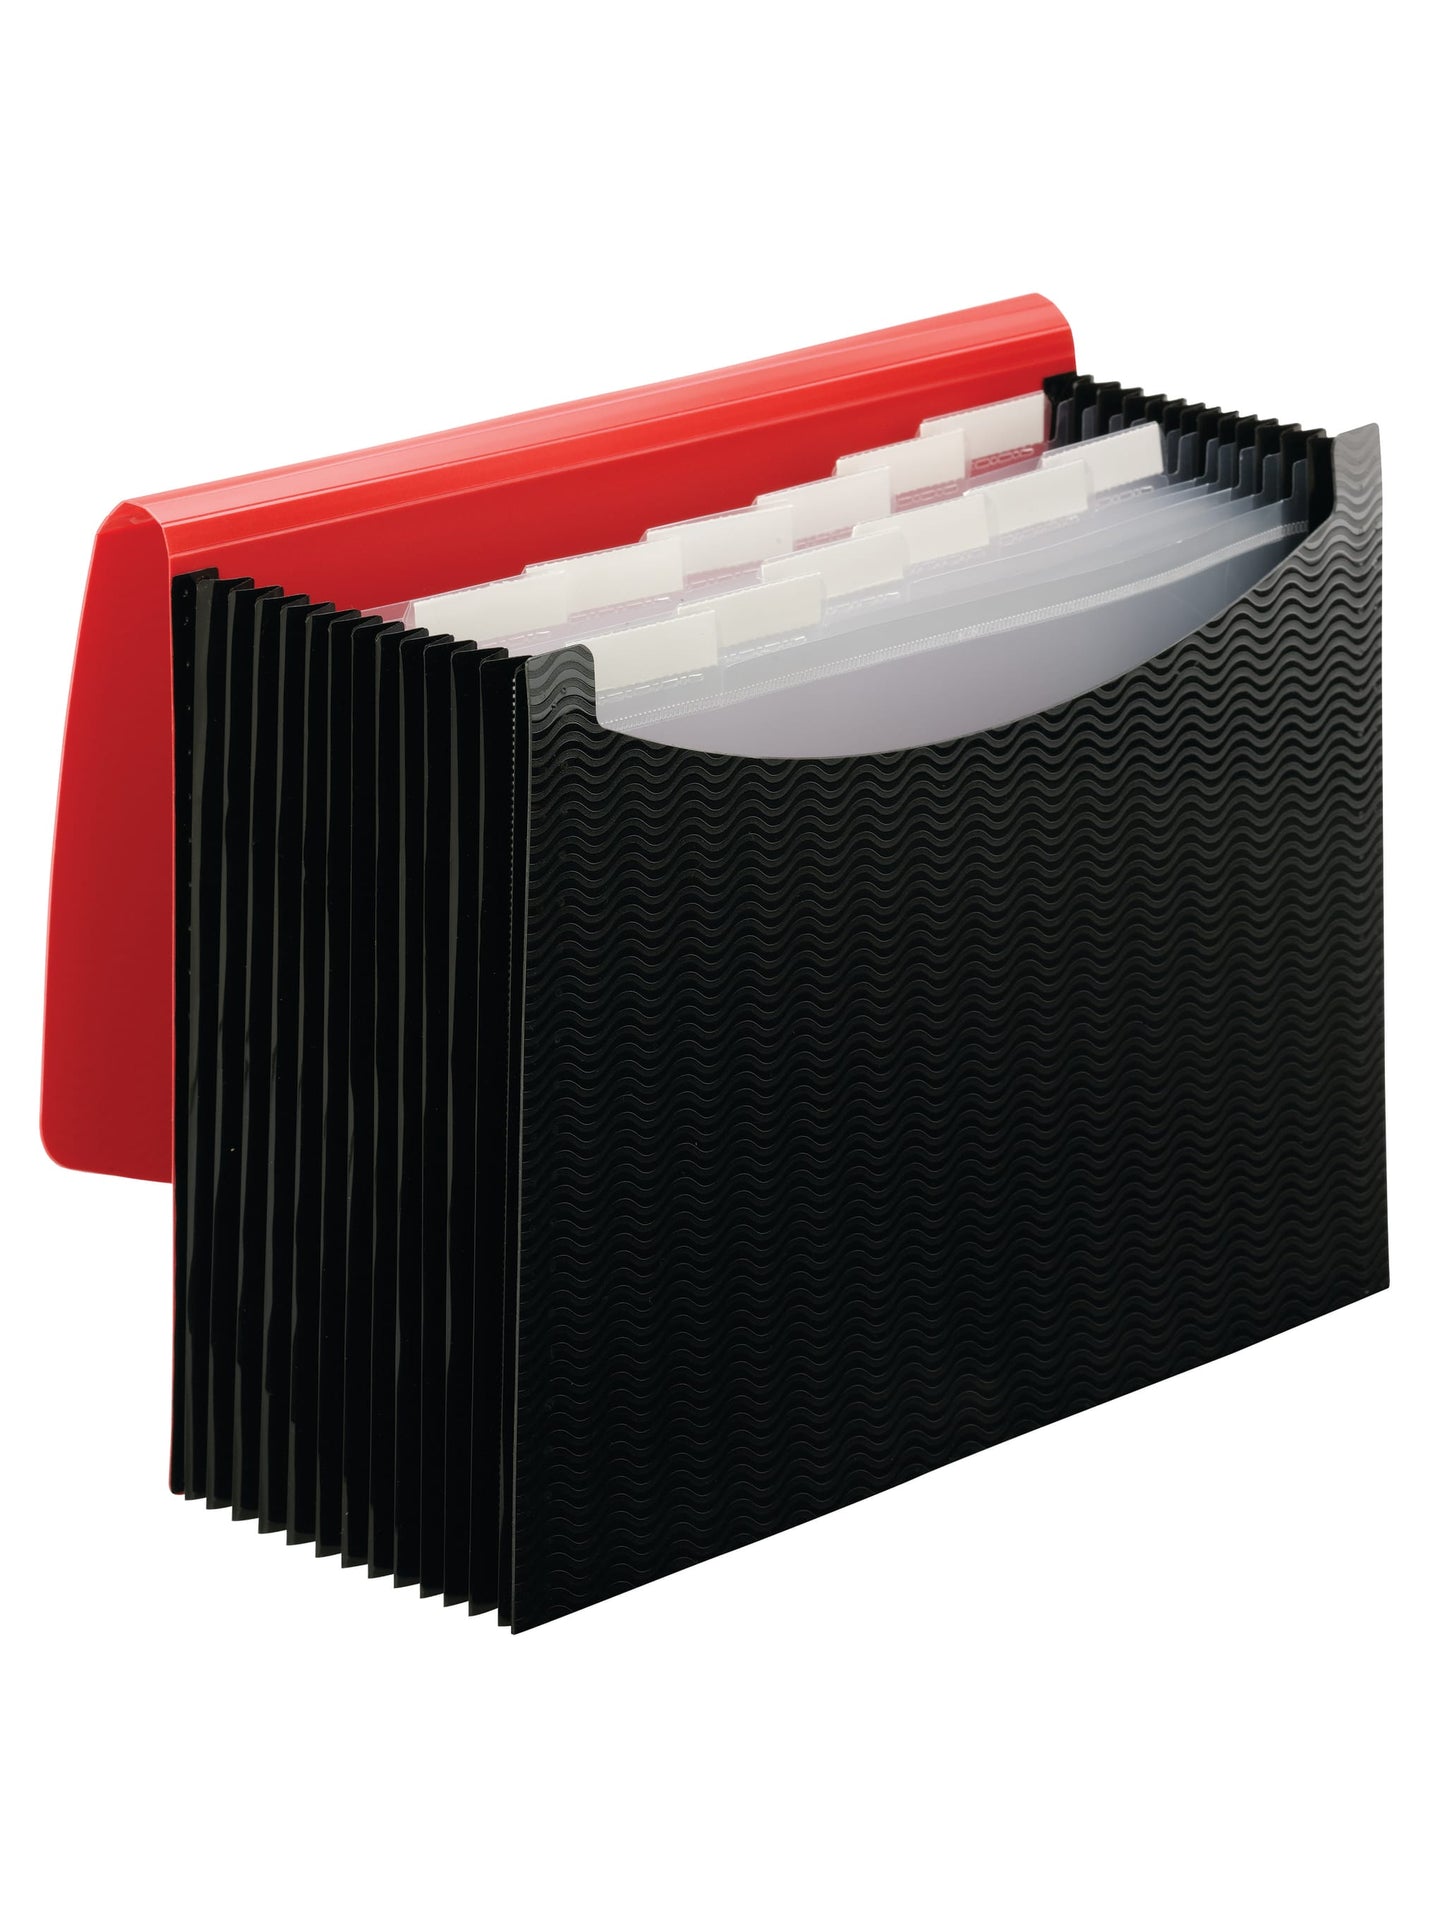 Poly Expanding Files with Flap, 12 Pockets, Wave Pattern, Red Color, Letter Size, Set of 1, 086486708661